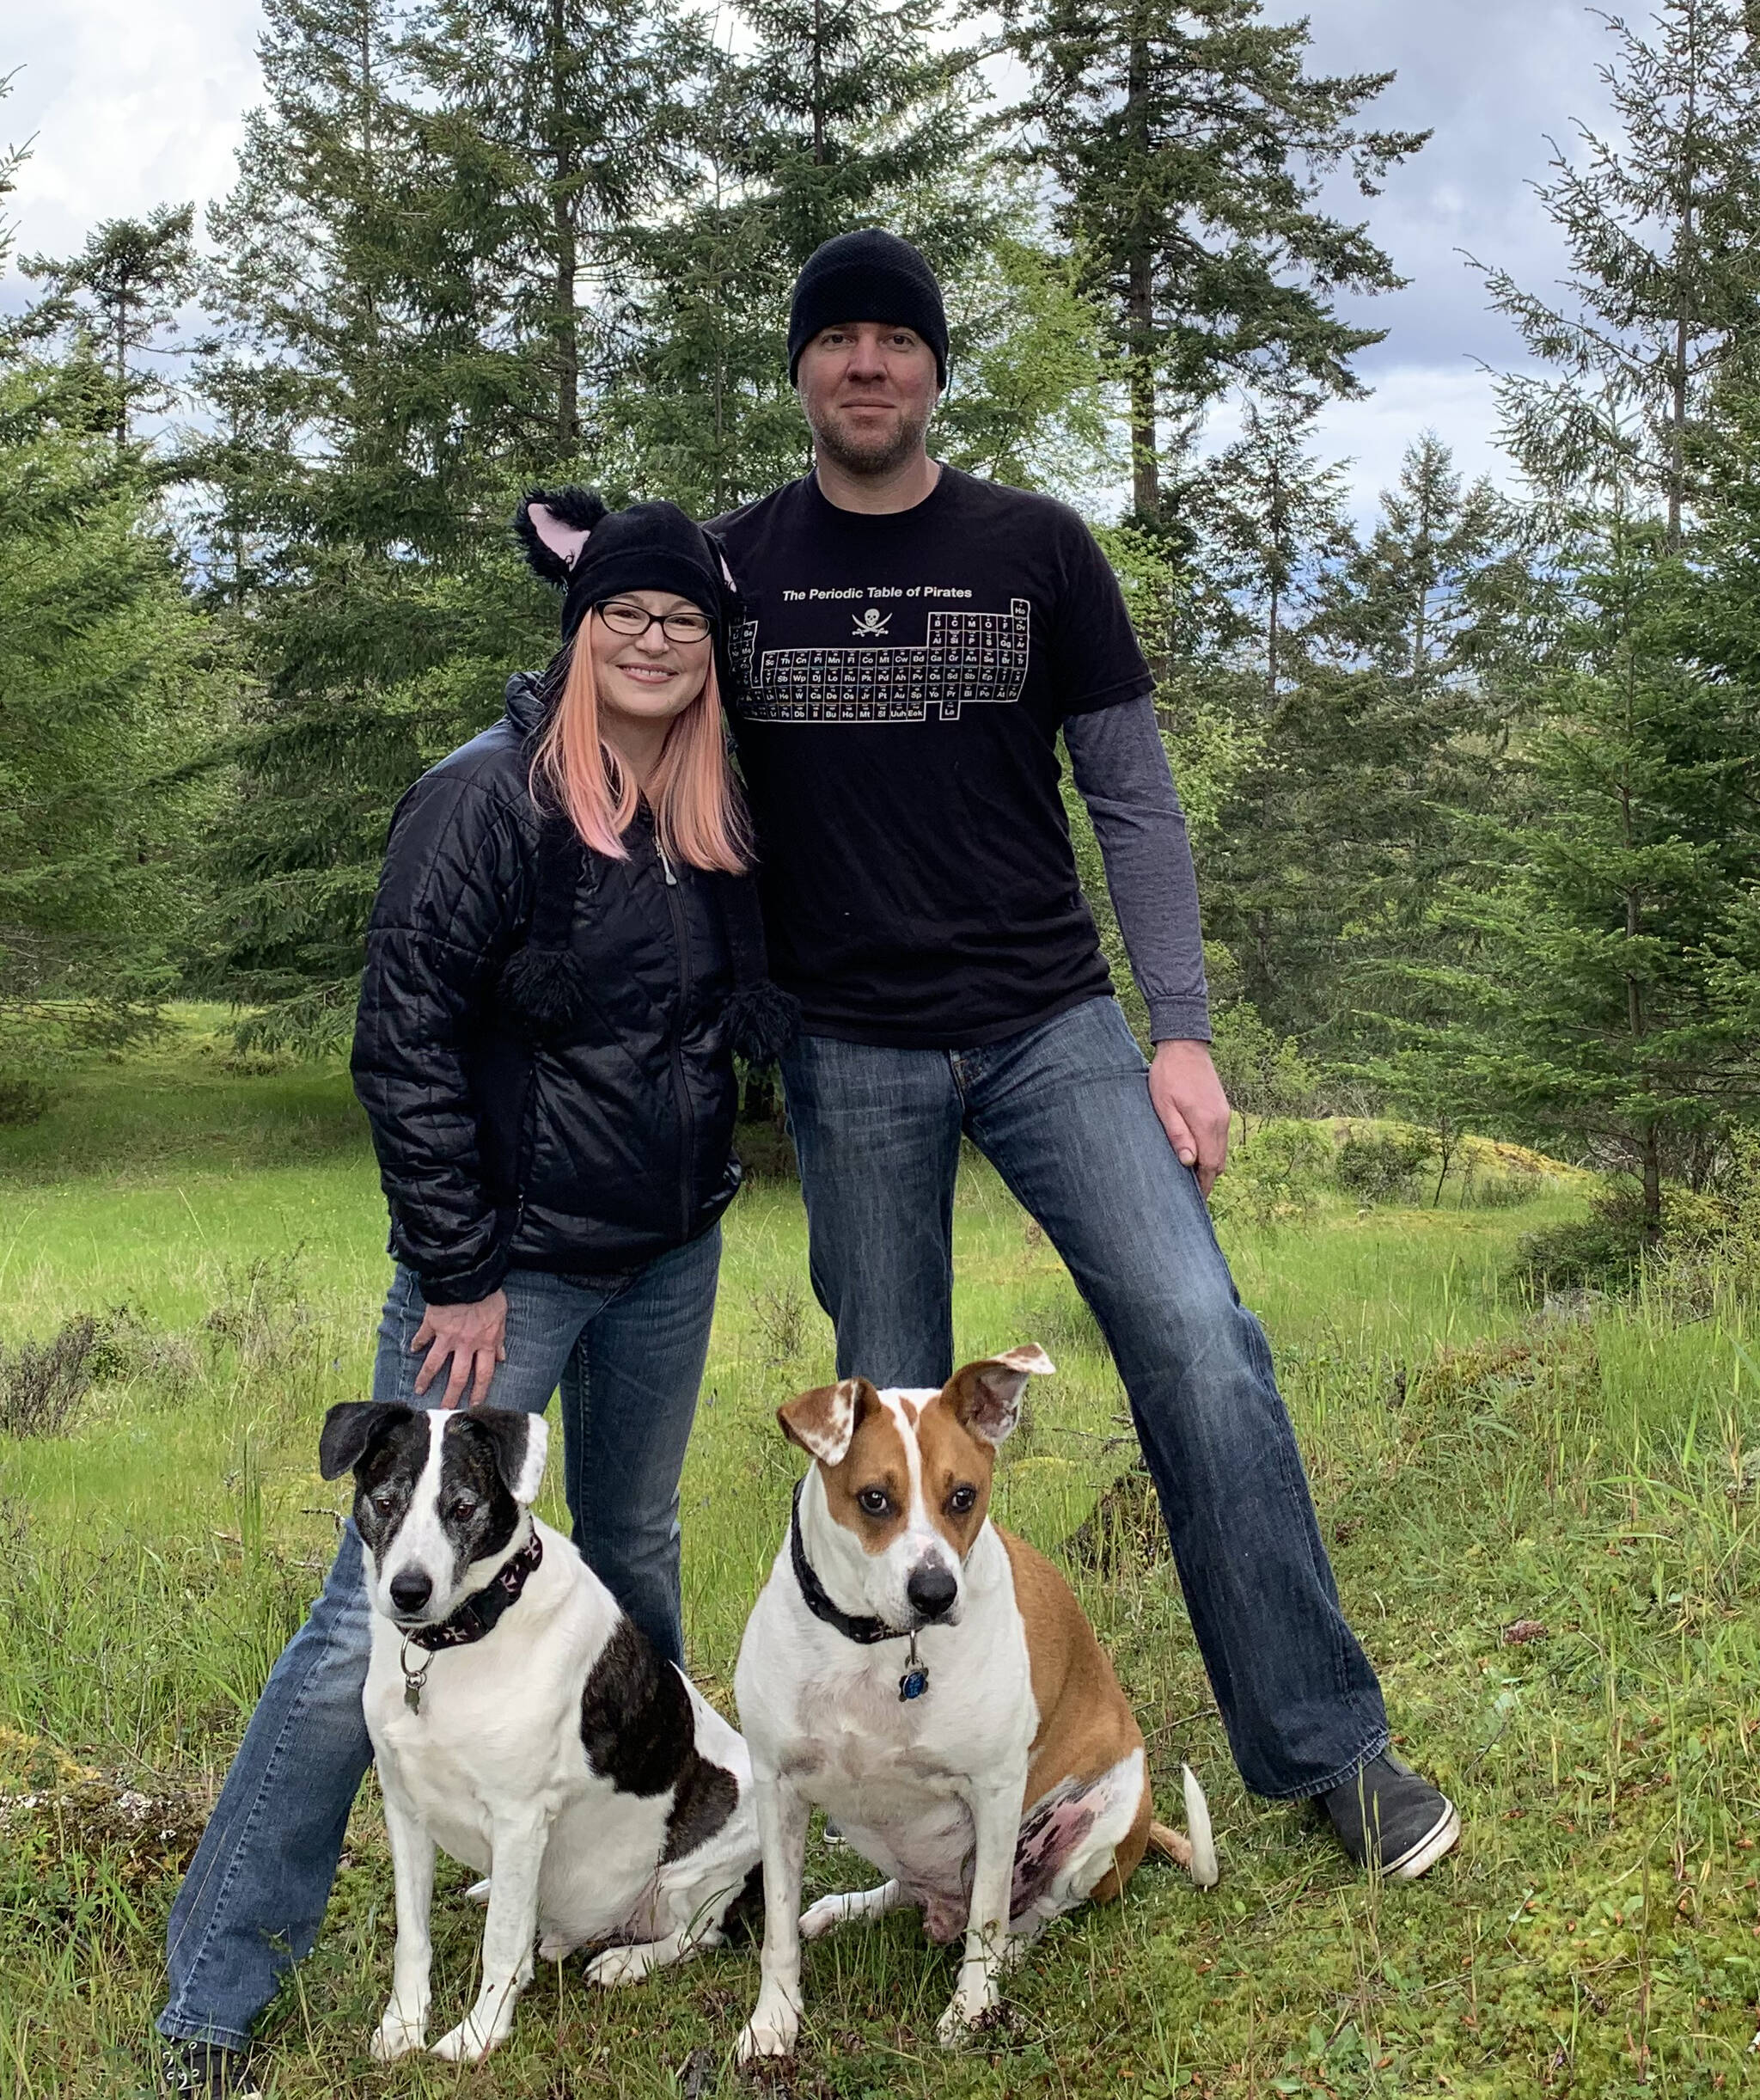 Contributed photo
Rob with his fiance Heather Davis and their dogs Loki and Jackson.